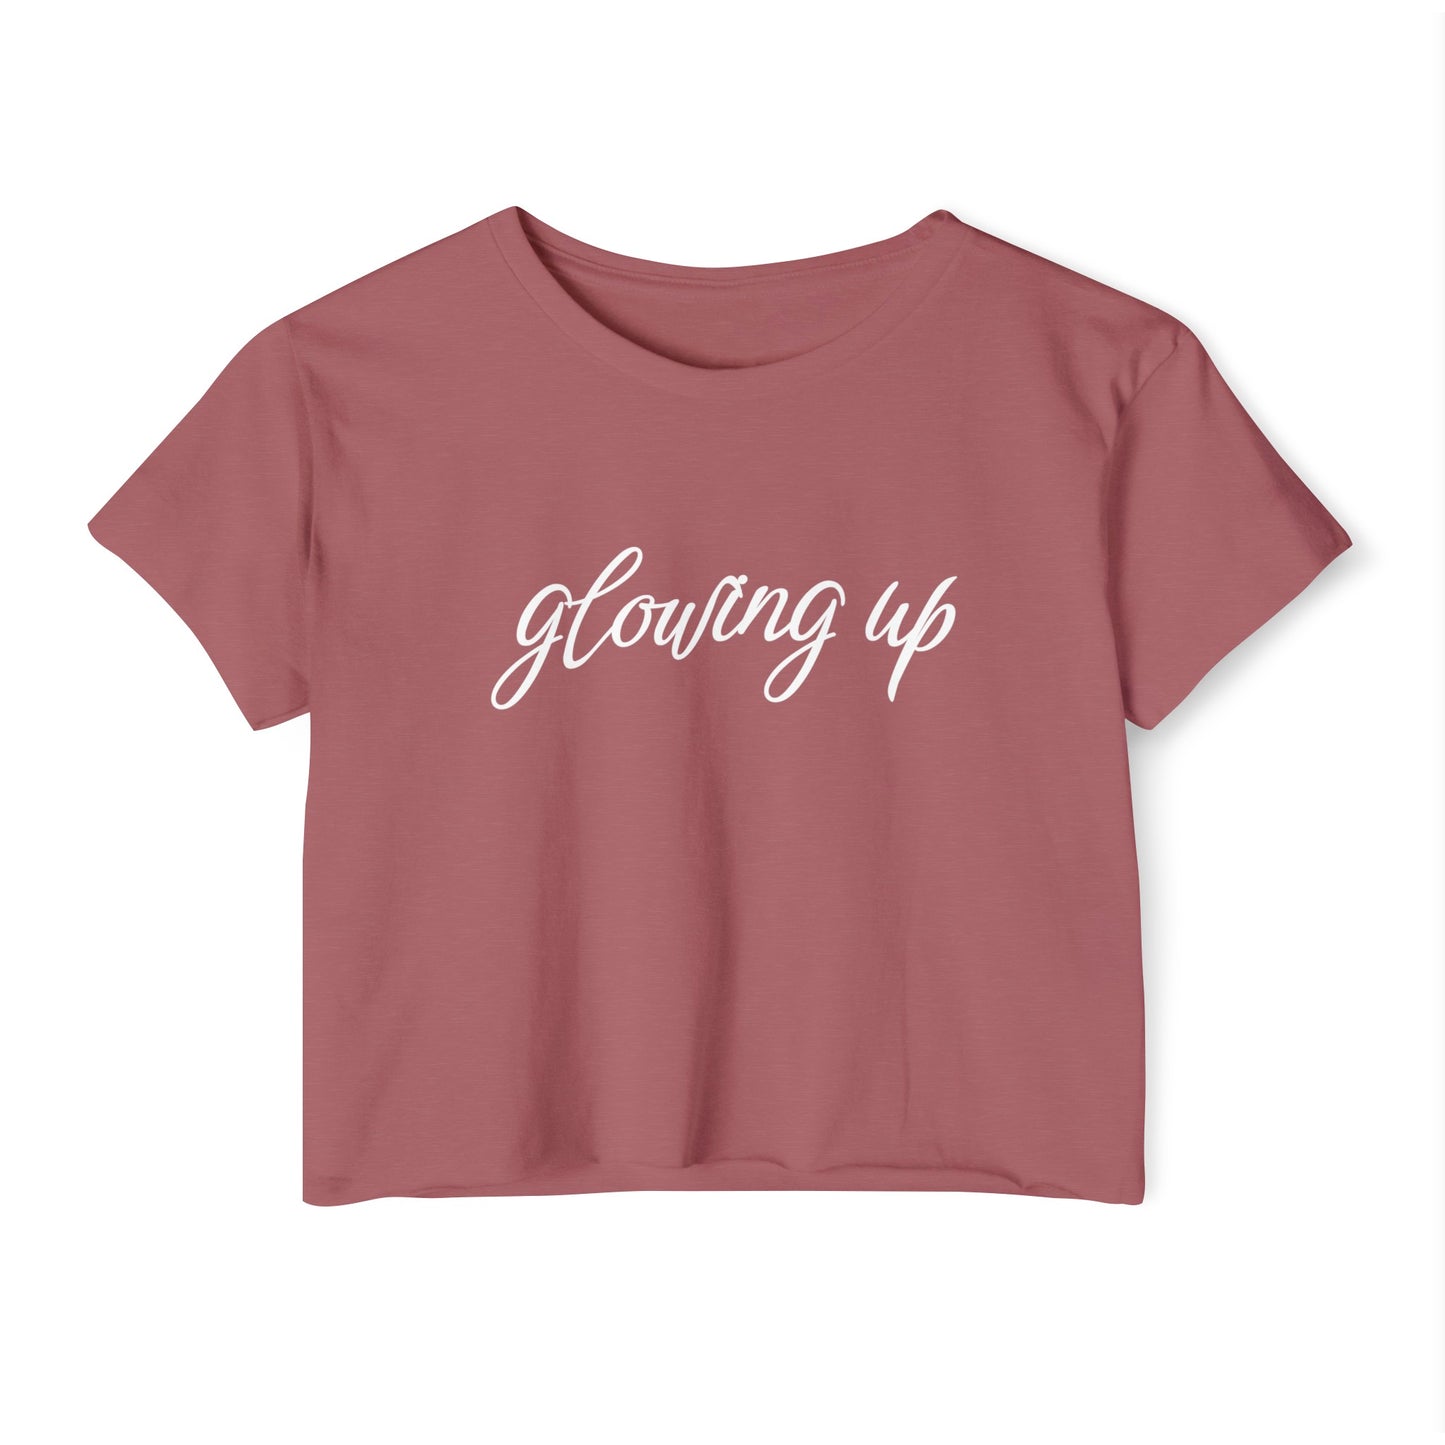 "glowing up" Cropped Tee